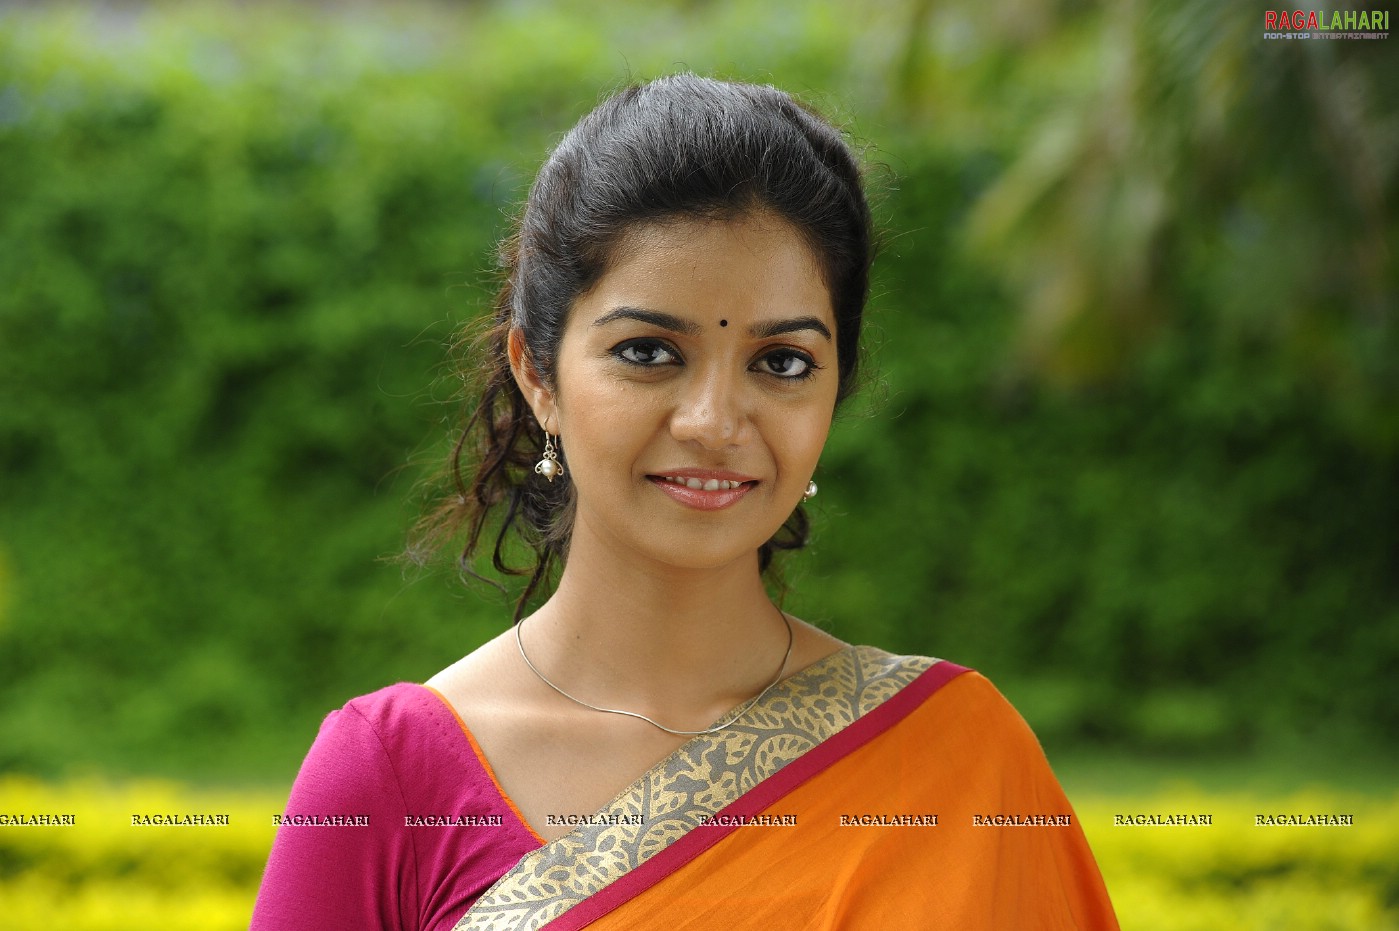 Colors Swathi (Posters)